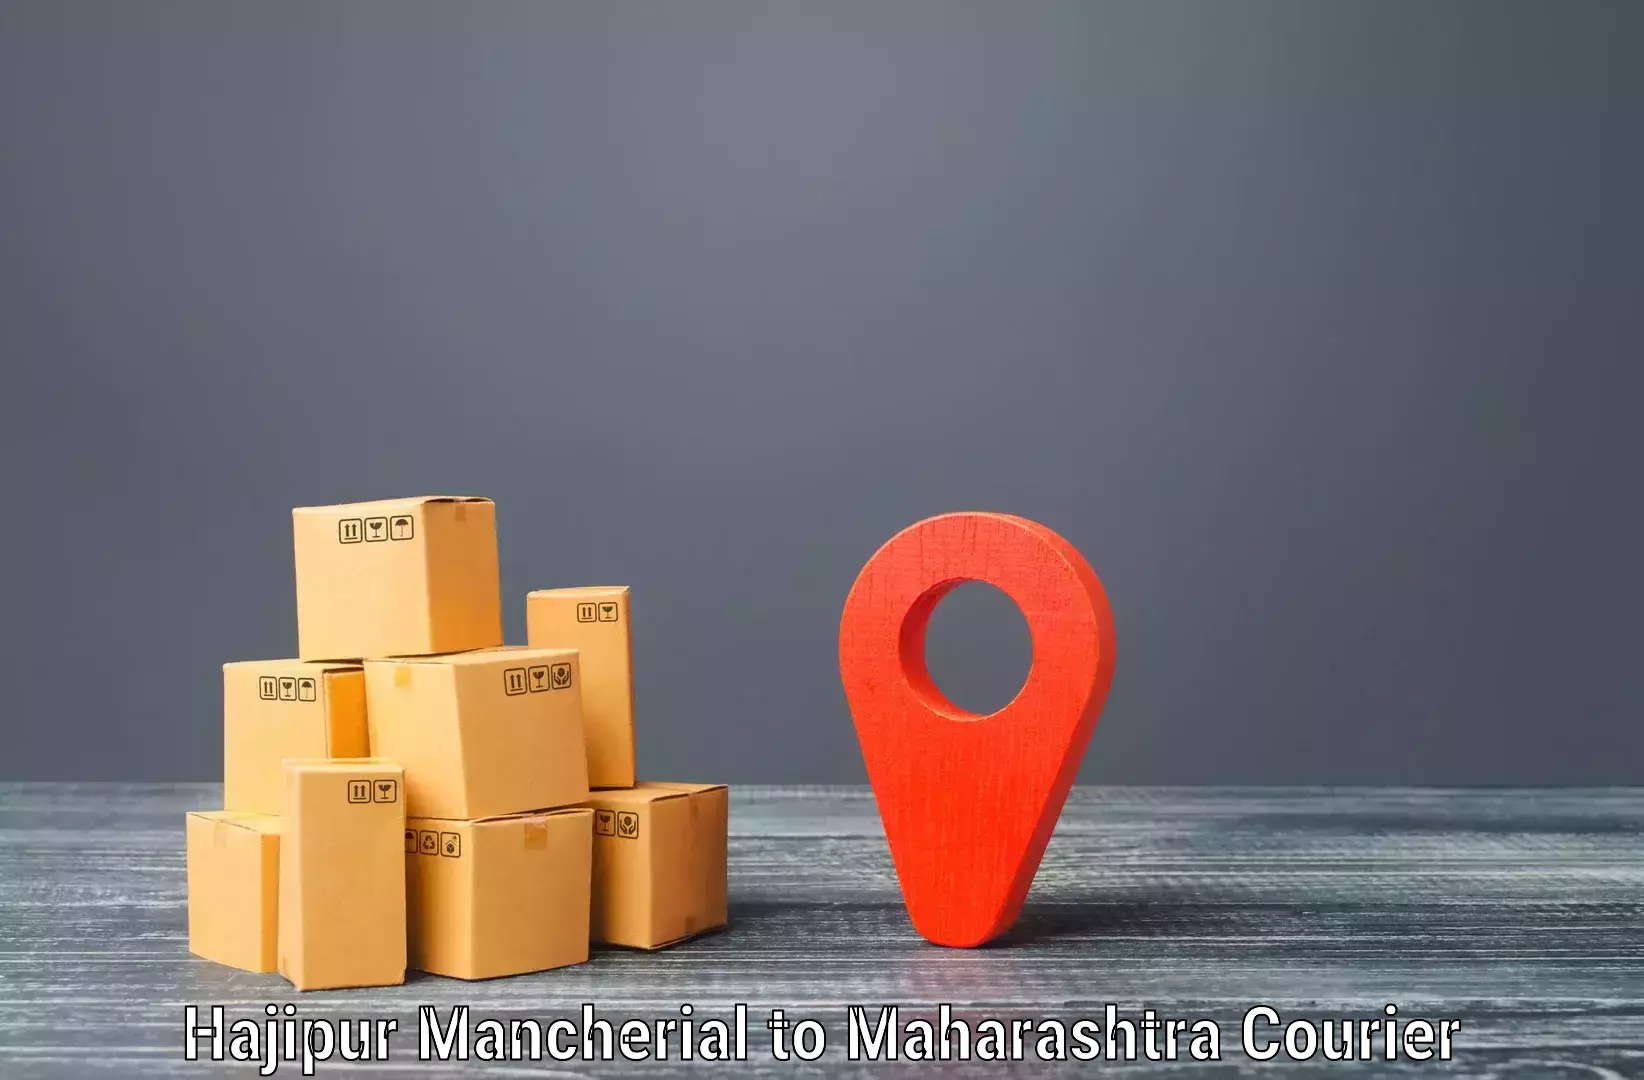 24-hour delivery options Hajipur Mancherial to DY Patil Vidyapeeth Mumbai